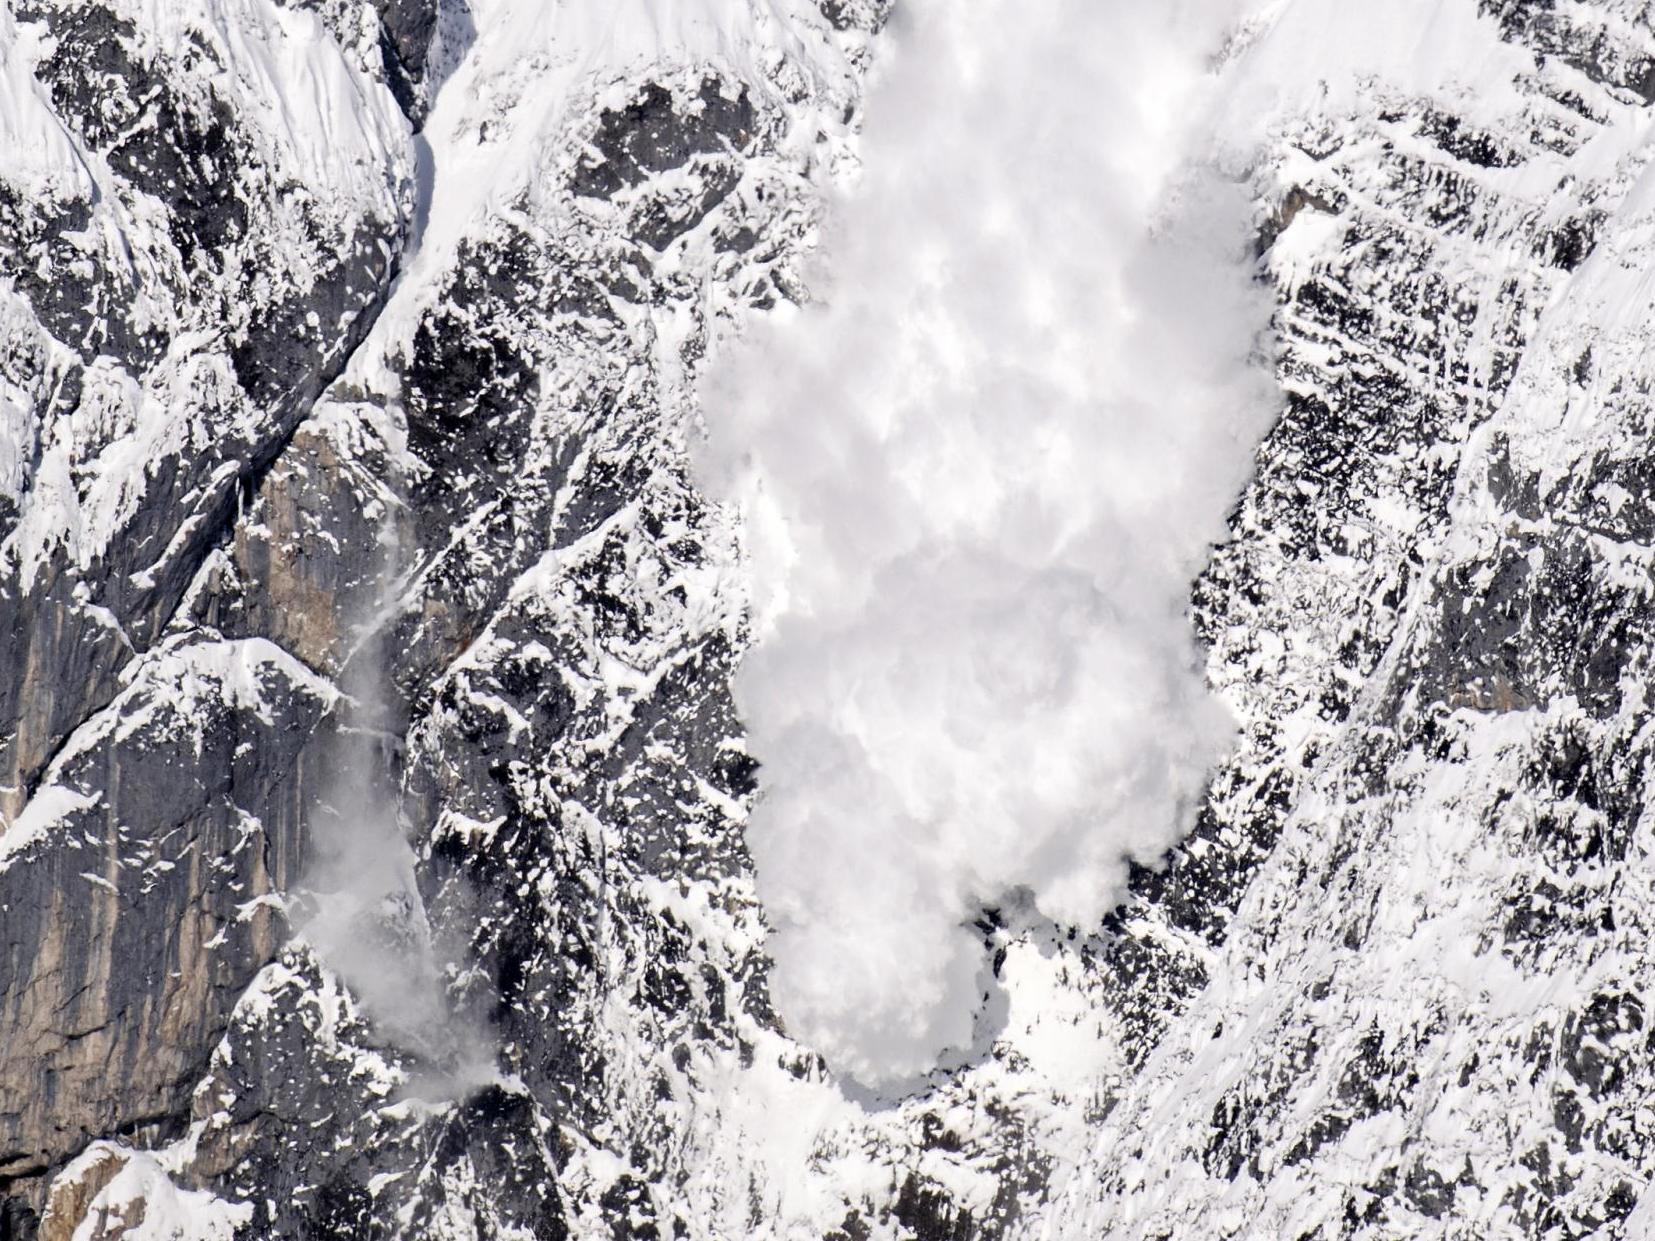 An artificially-induced avalanche rushes down a mountain in Austria as part of avalanche control measures